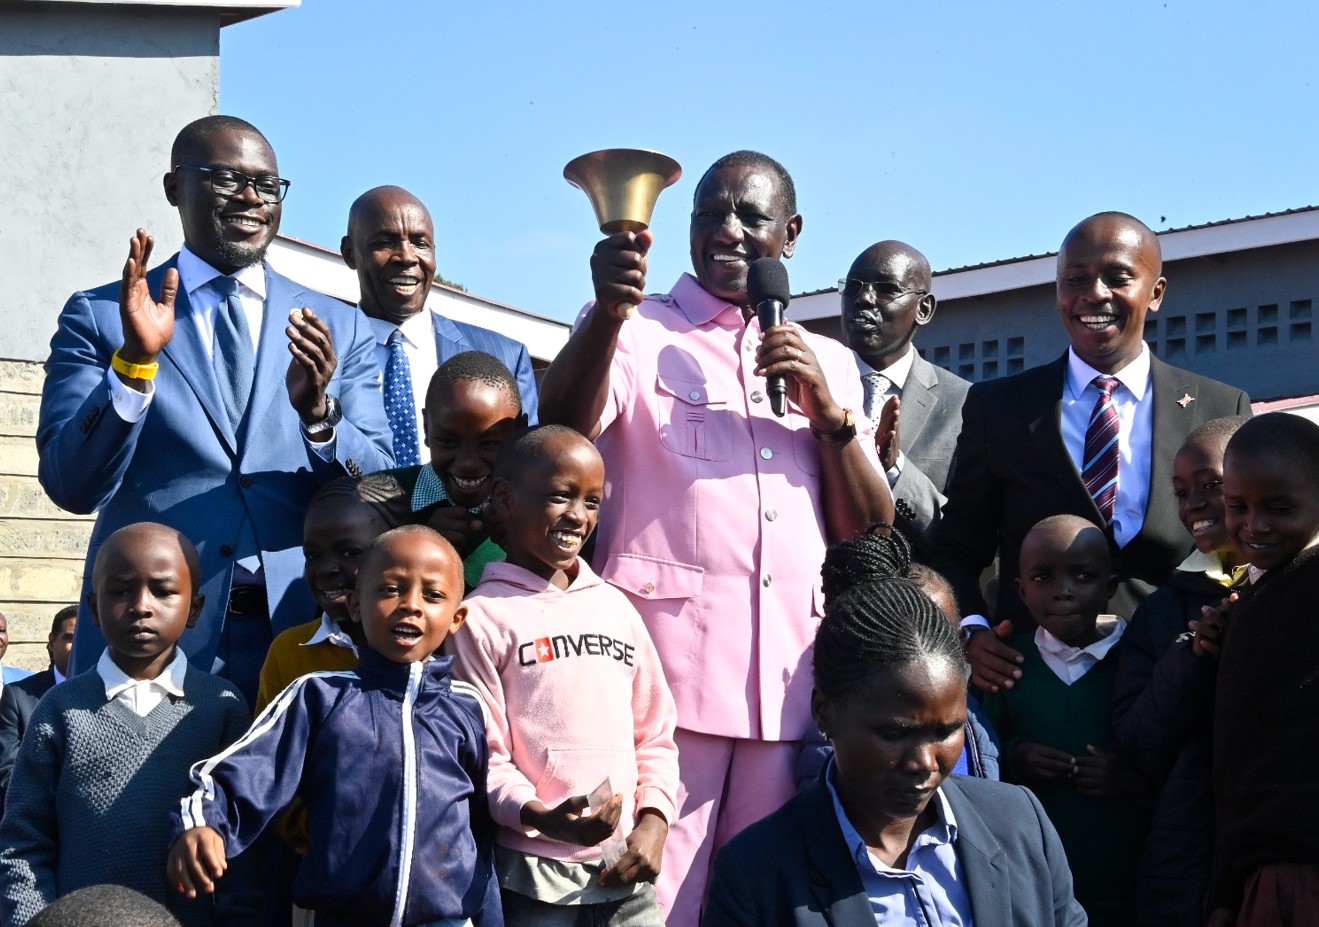 Five years after tragedy struck, Ruto commissions Ng’ando ward's first public school